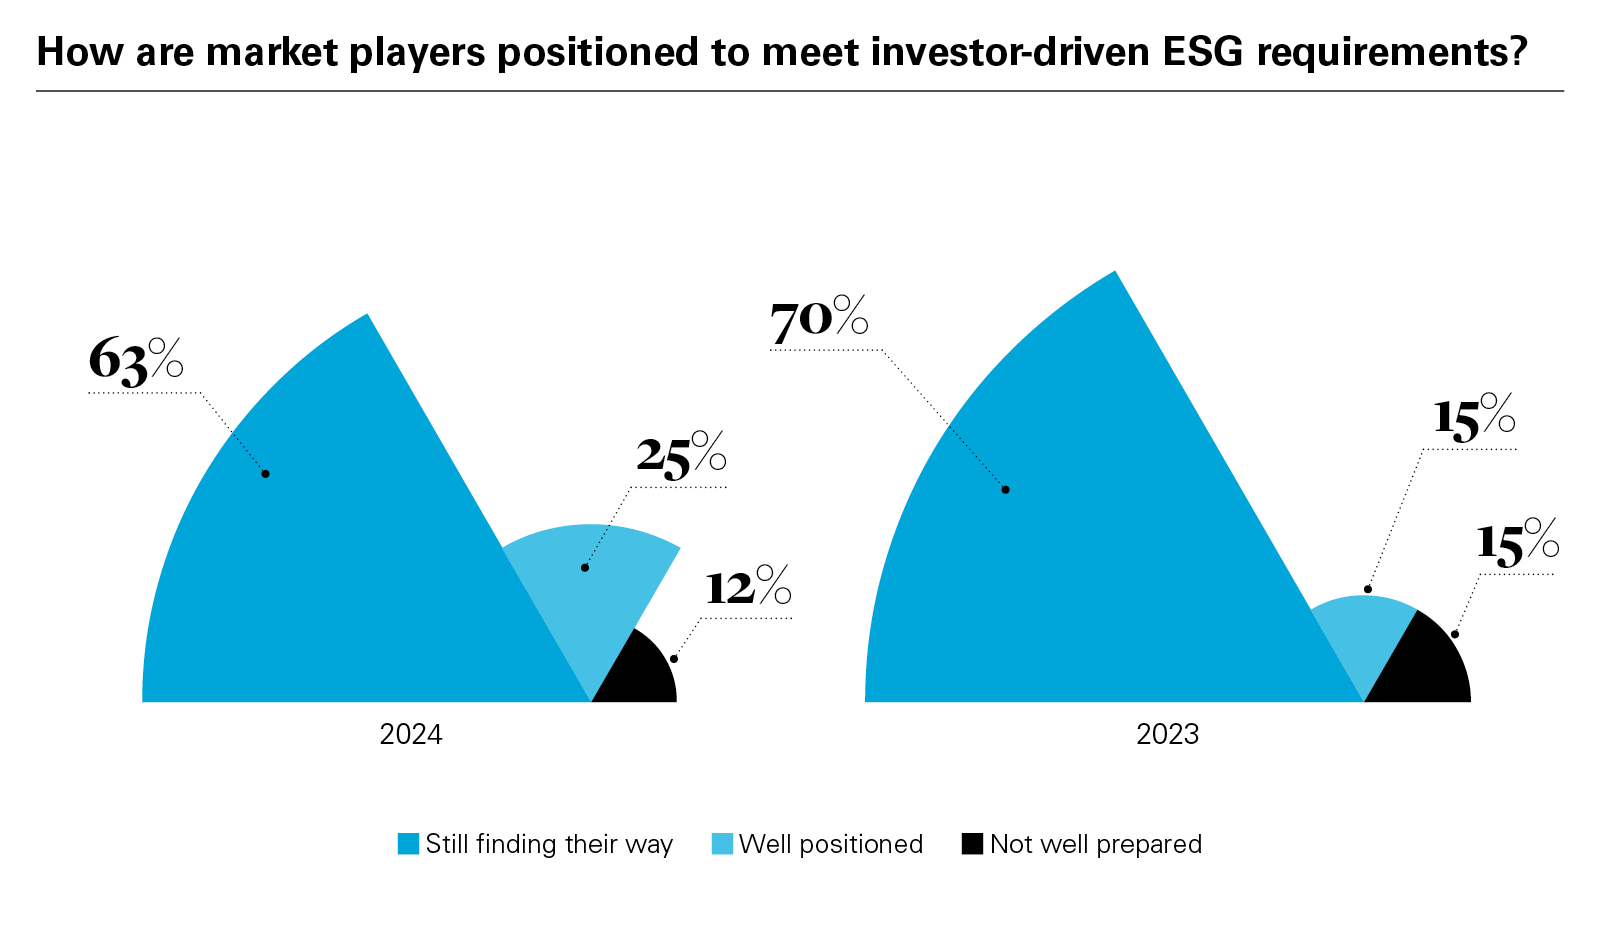 How are market players positioned to meet investor-driven ESG requirements?